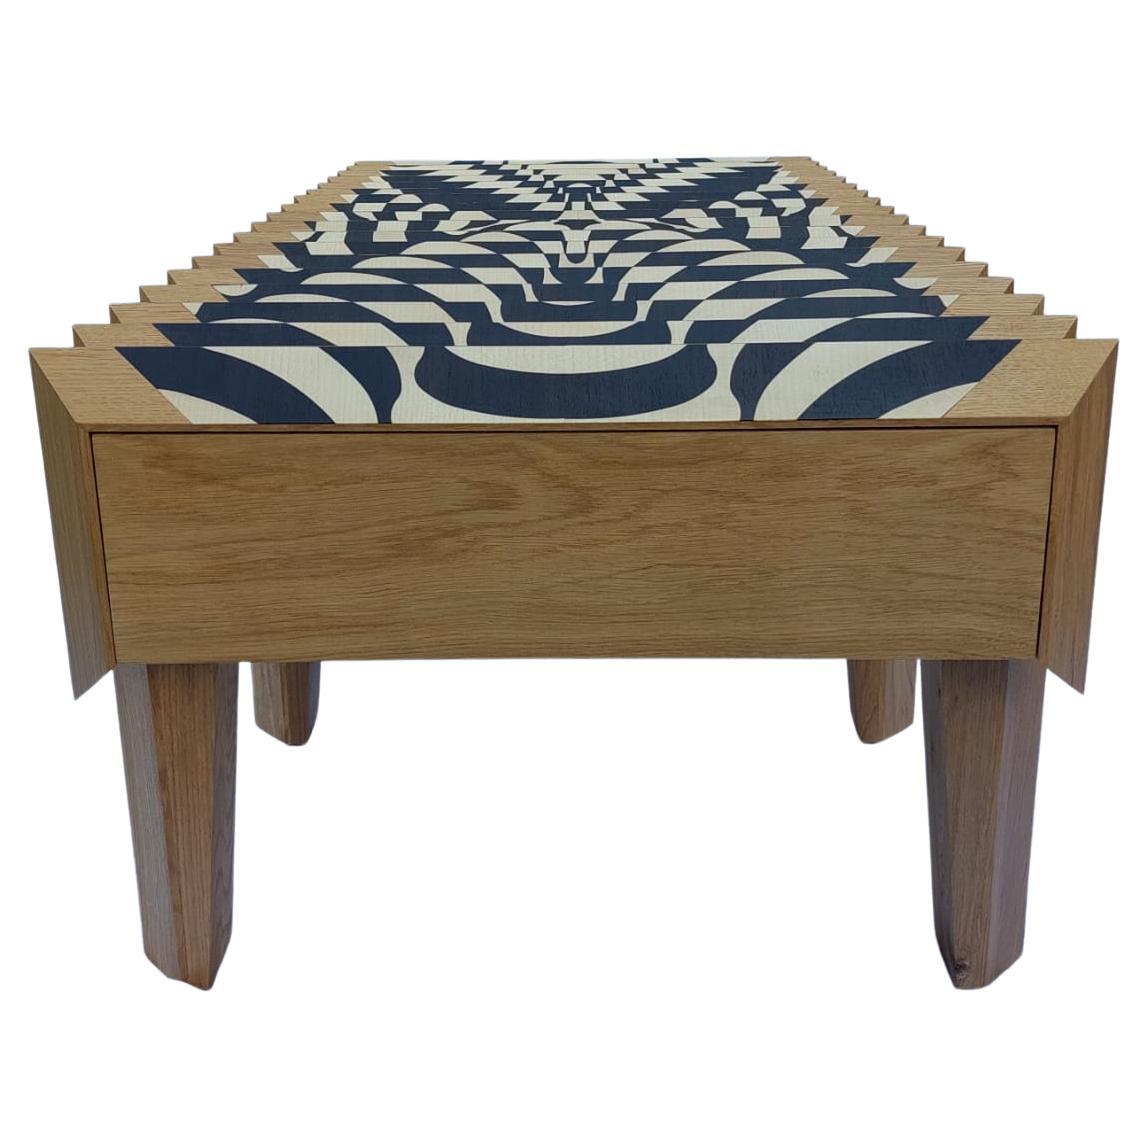 Marquetry oak Wood Coffee Table Spirale Pattern The Netherlands By Sordile For Sale